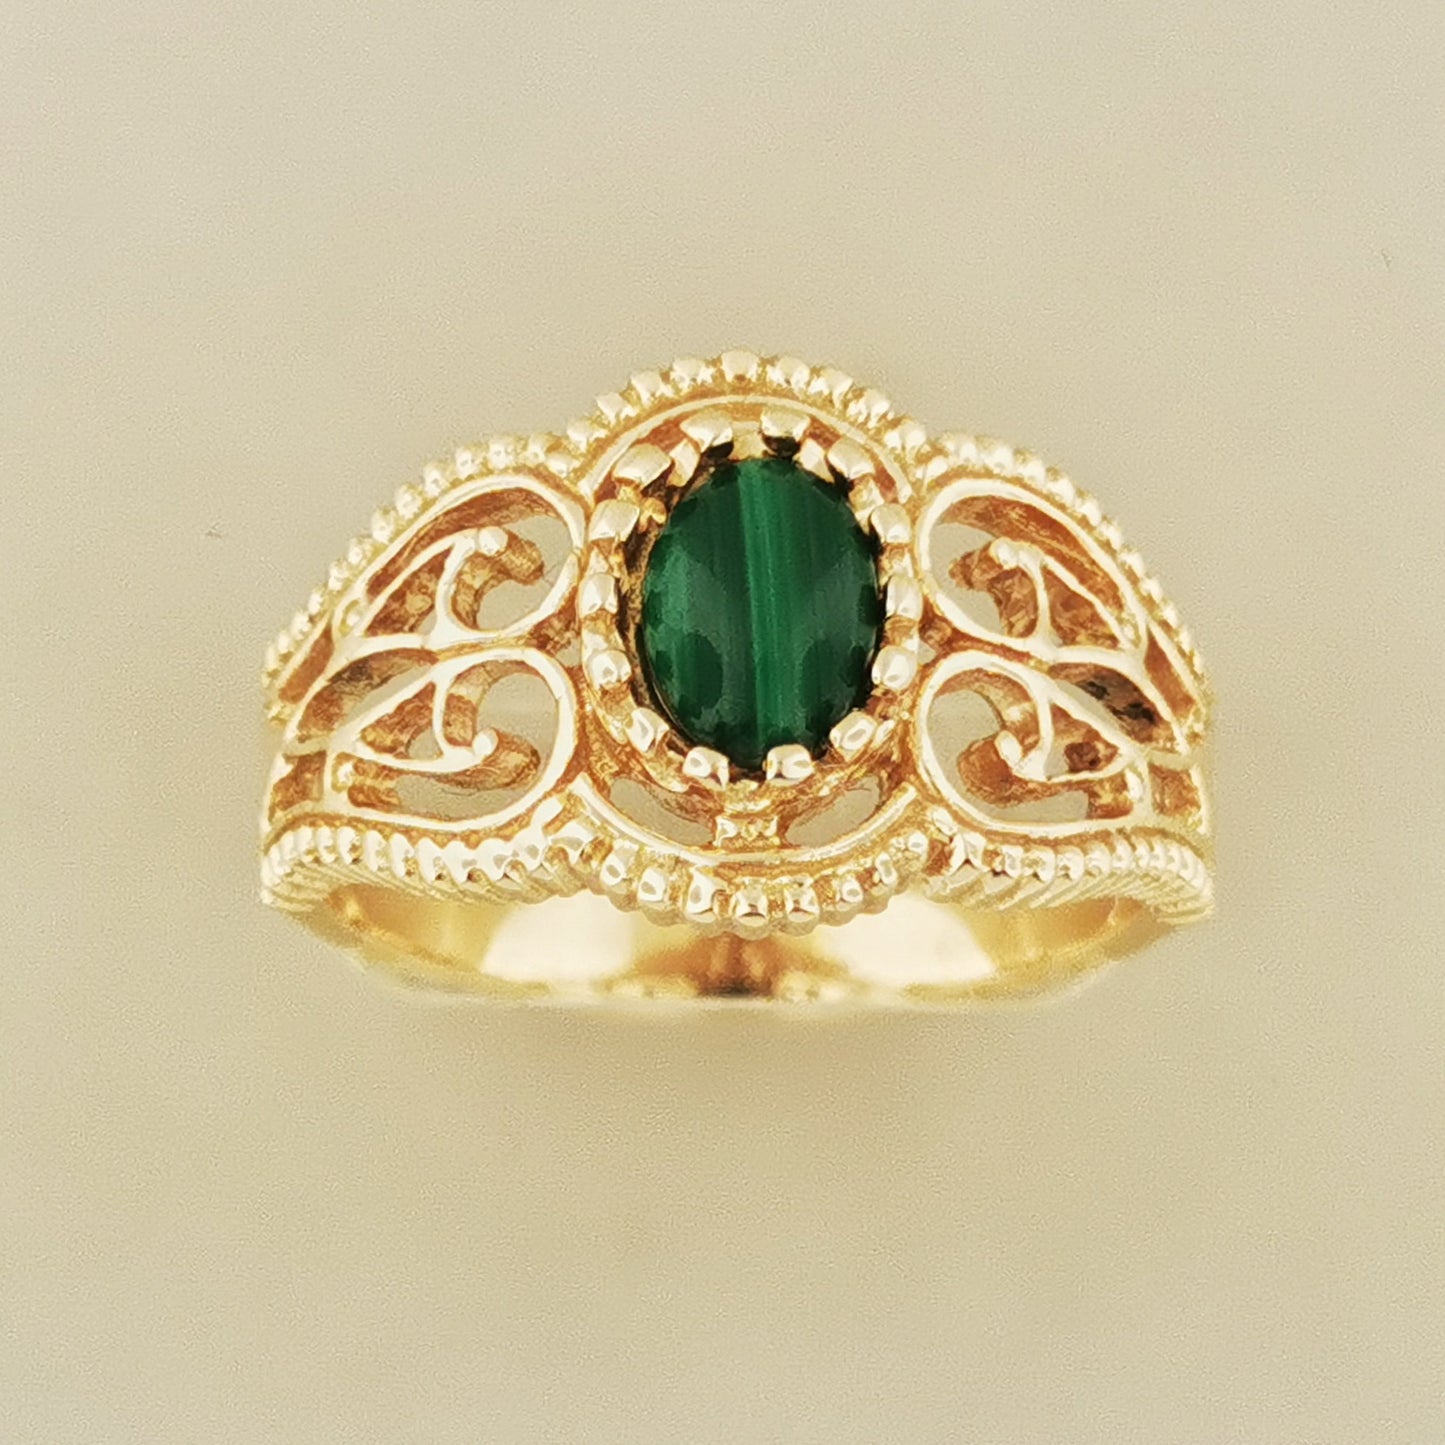 Vintage Style Filigree Ring with Gemstone in Antique Bronze